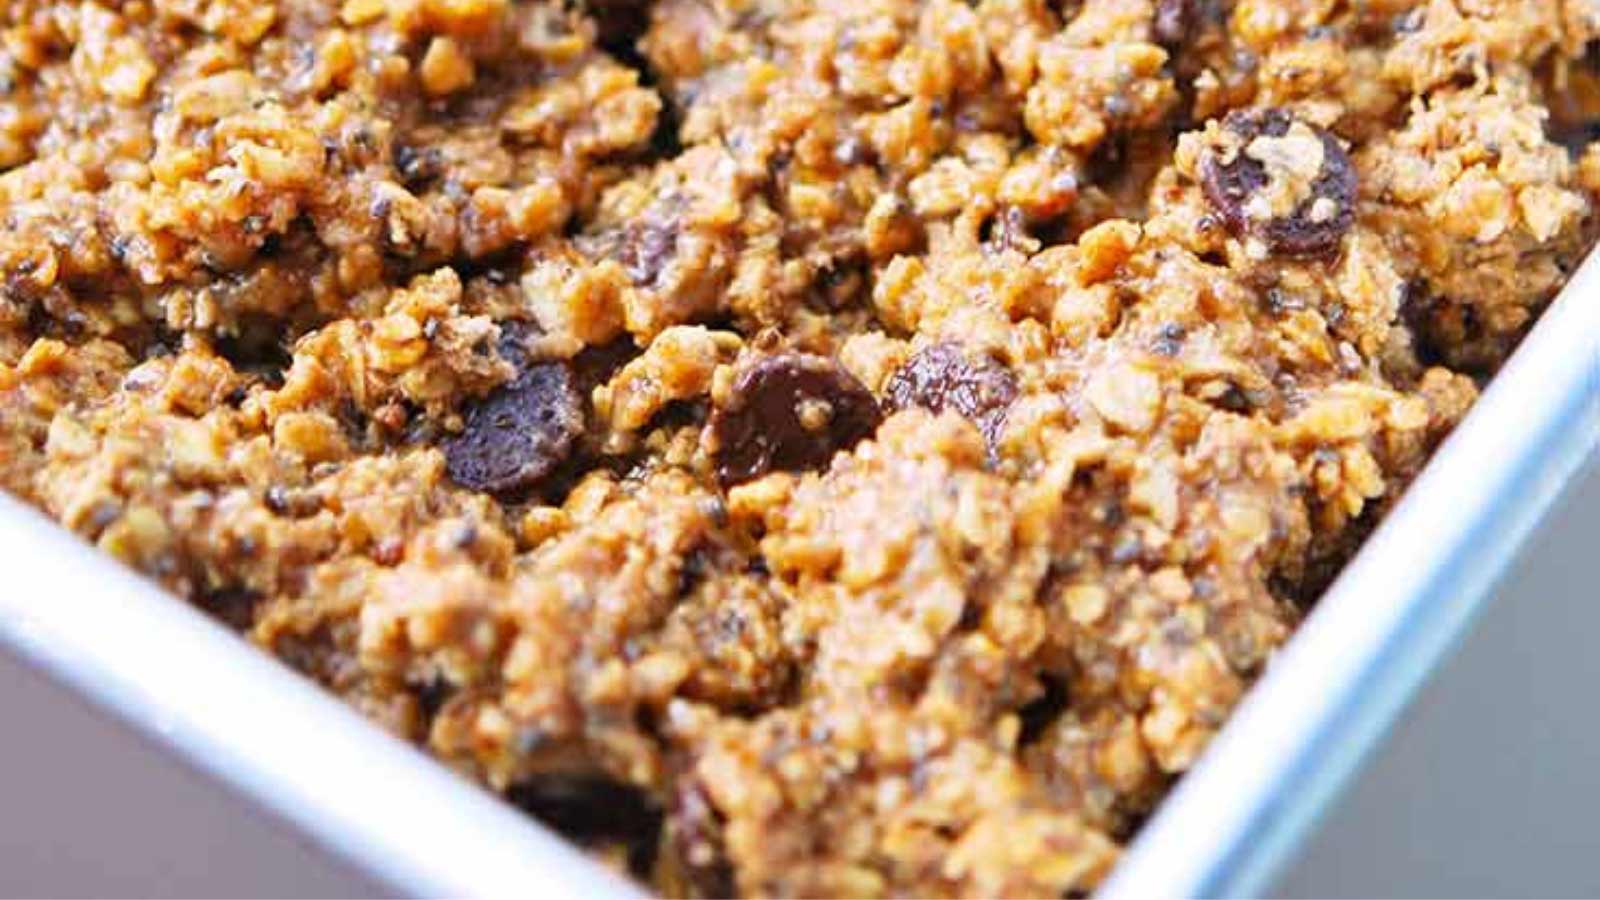 <p>These <a href="https://www.thegraciouspantry.com/clean-eating-cinnamon-chocolate-chip-protein-bars/">chocolate chip protein bars</a> are fantastic snacks that you can make in batches at home. Once you try making them with chia seeds, you won’t buy protein bars from the store anymore. They are so much cheaper to make at home, and they taste better, too. Plus, you can customize these any way you wish.</p>